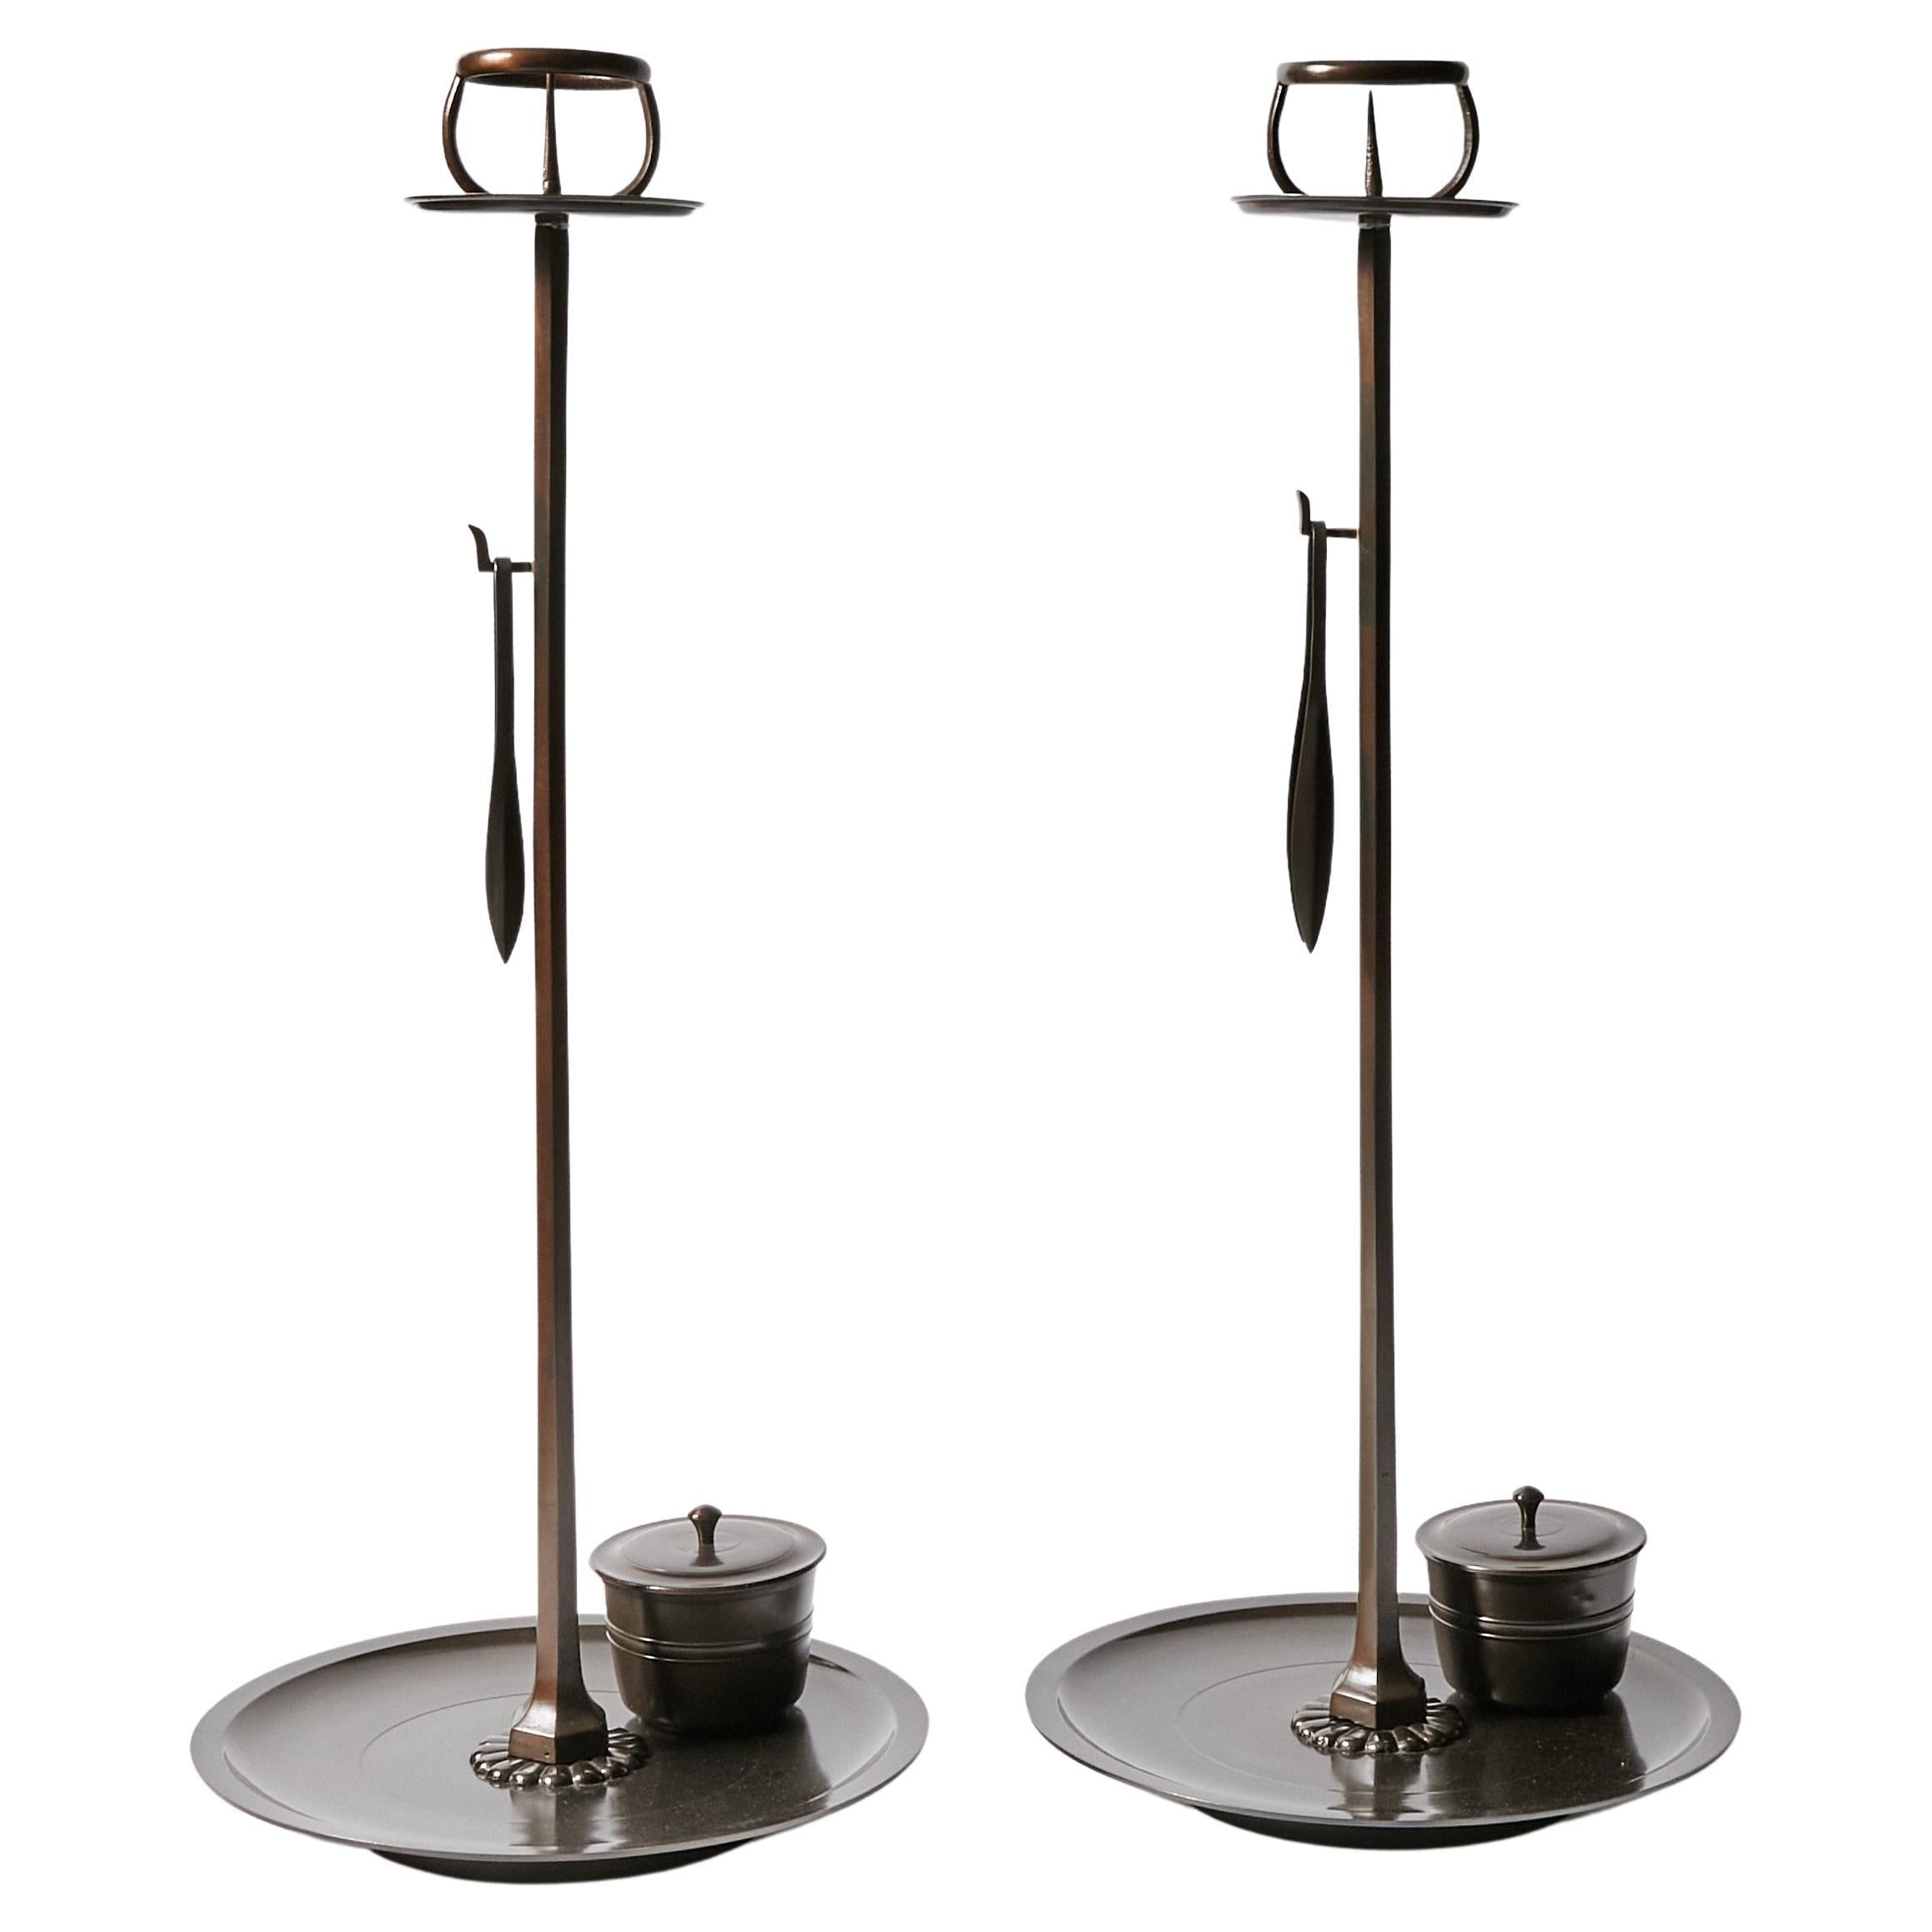 Pair of Antique Shokudai Candle Stands from Japan